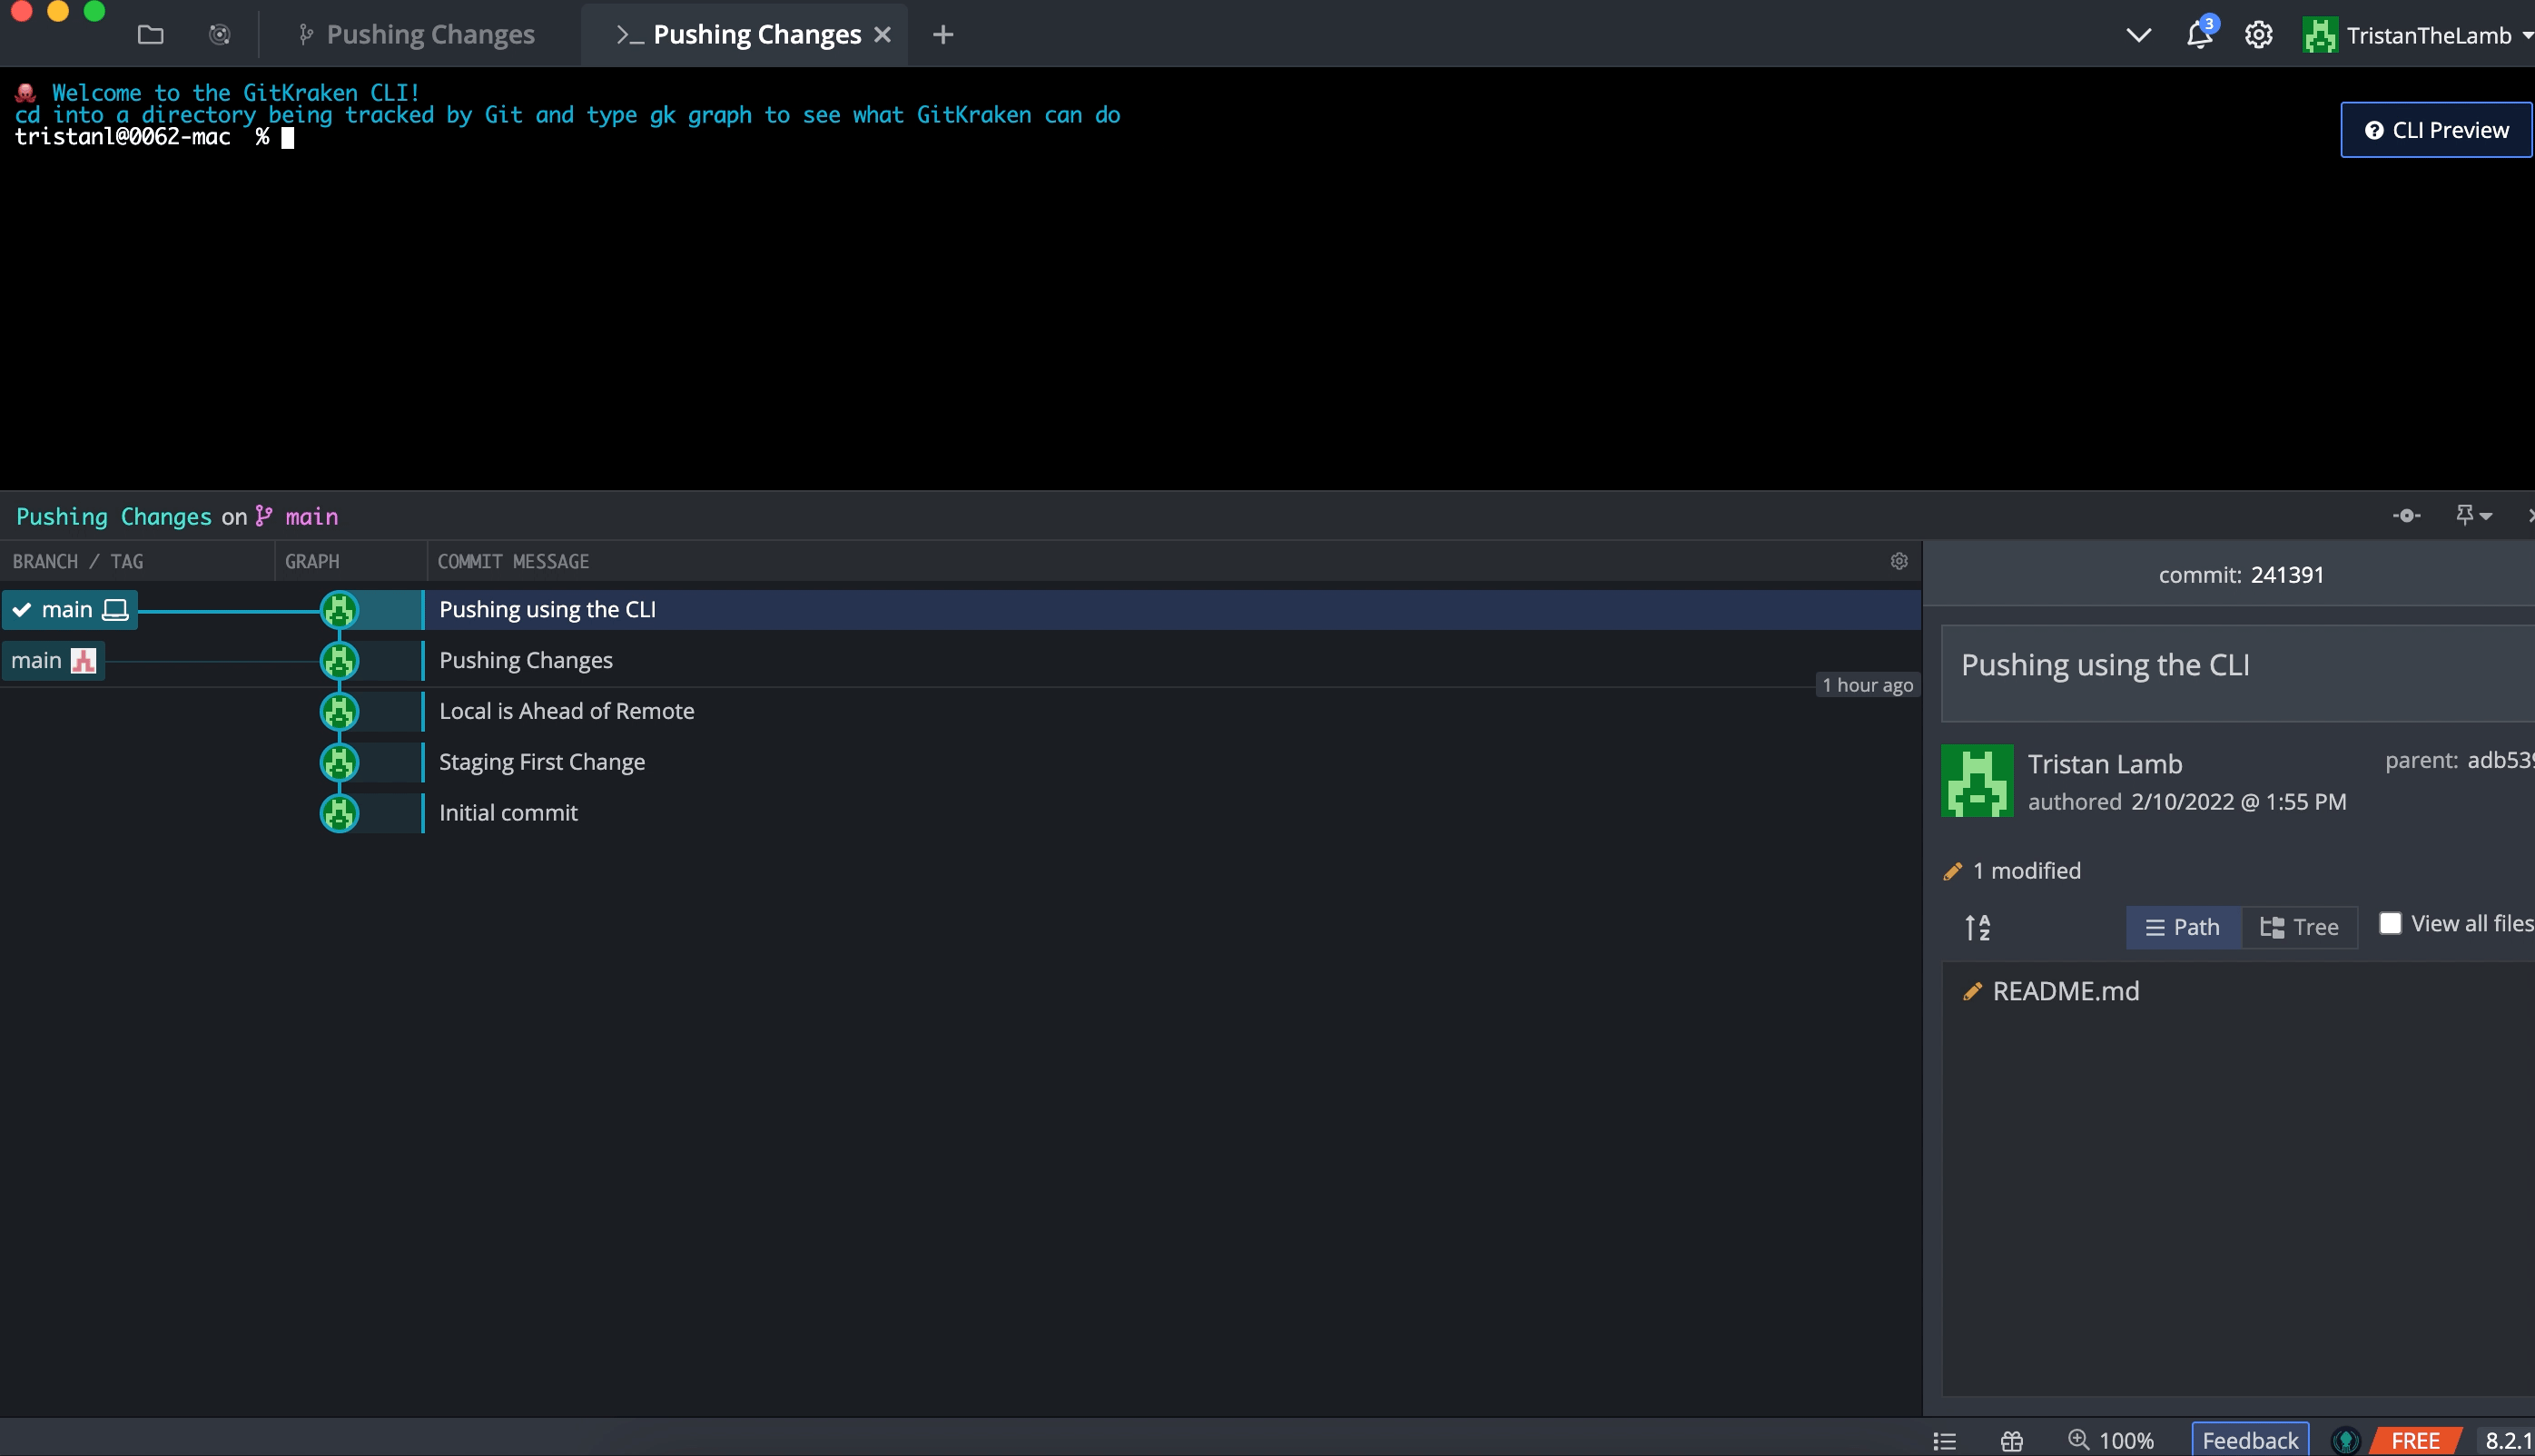 Short looping video depicts the process of pushing from GitKraken Client's CLI